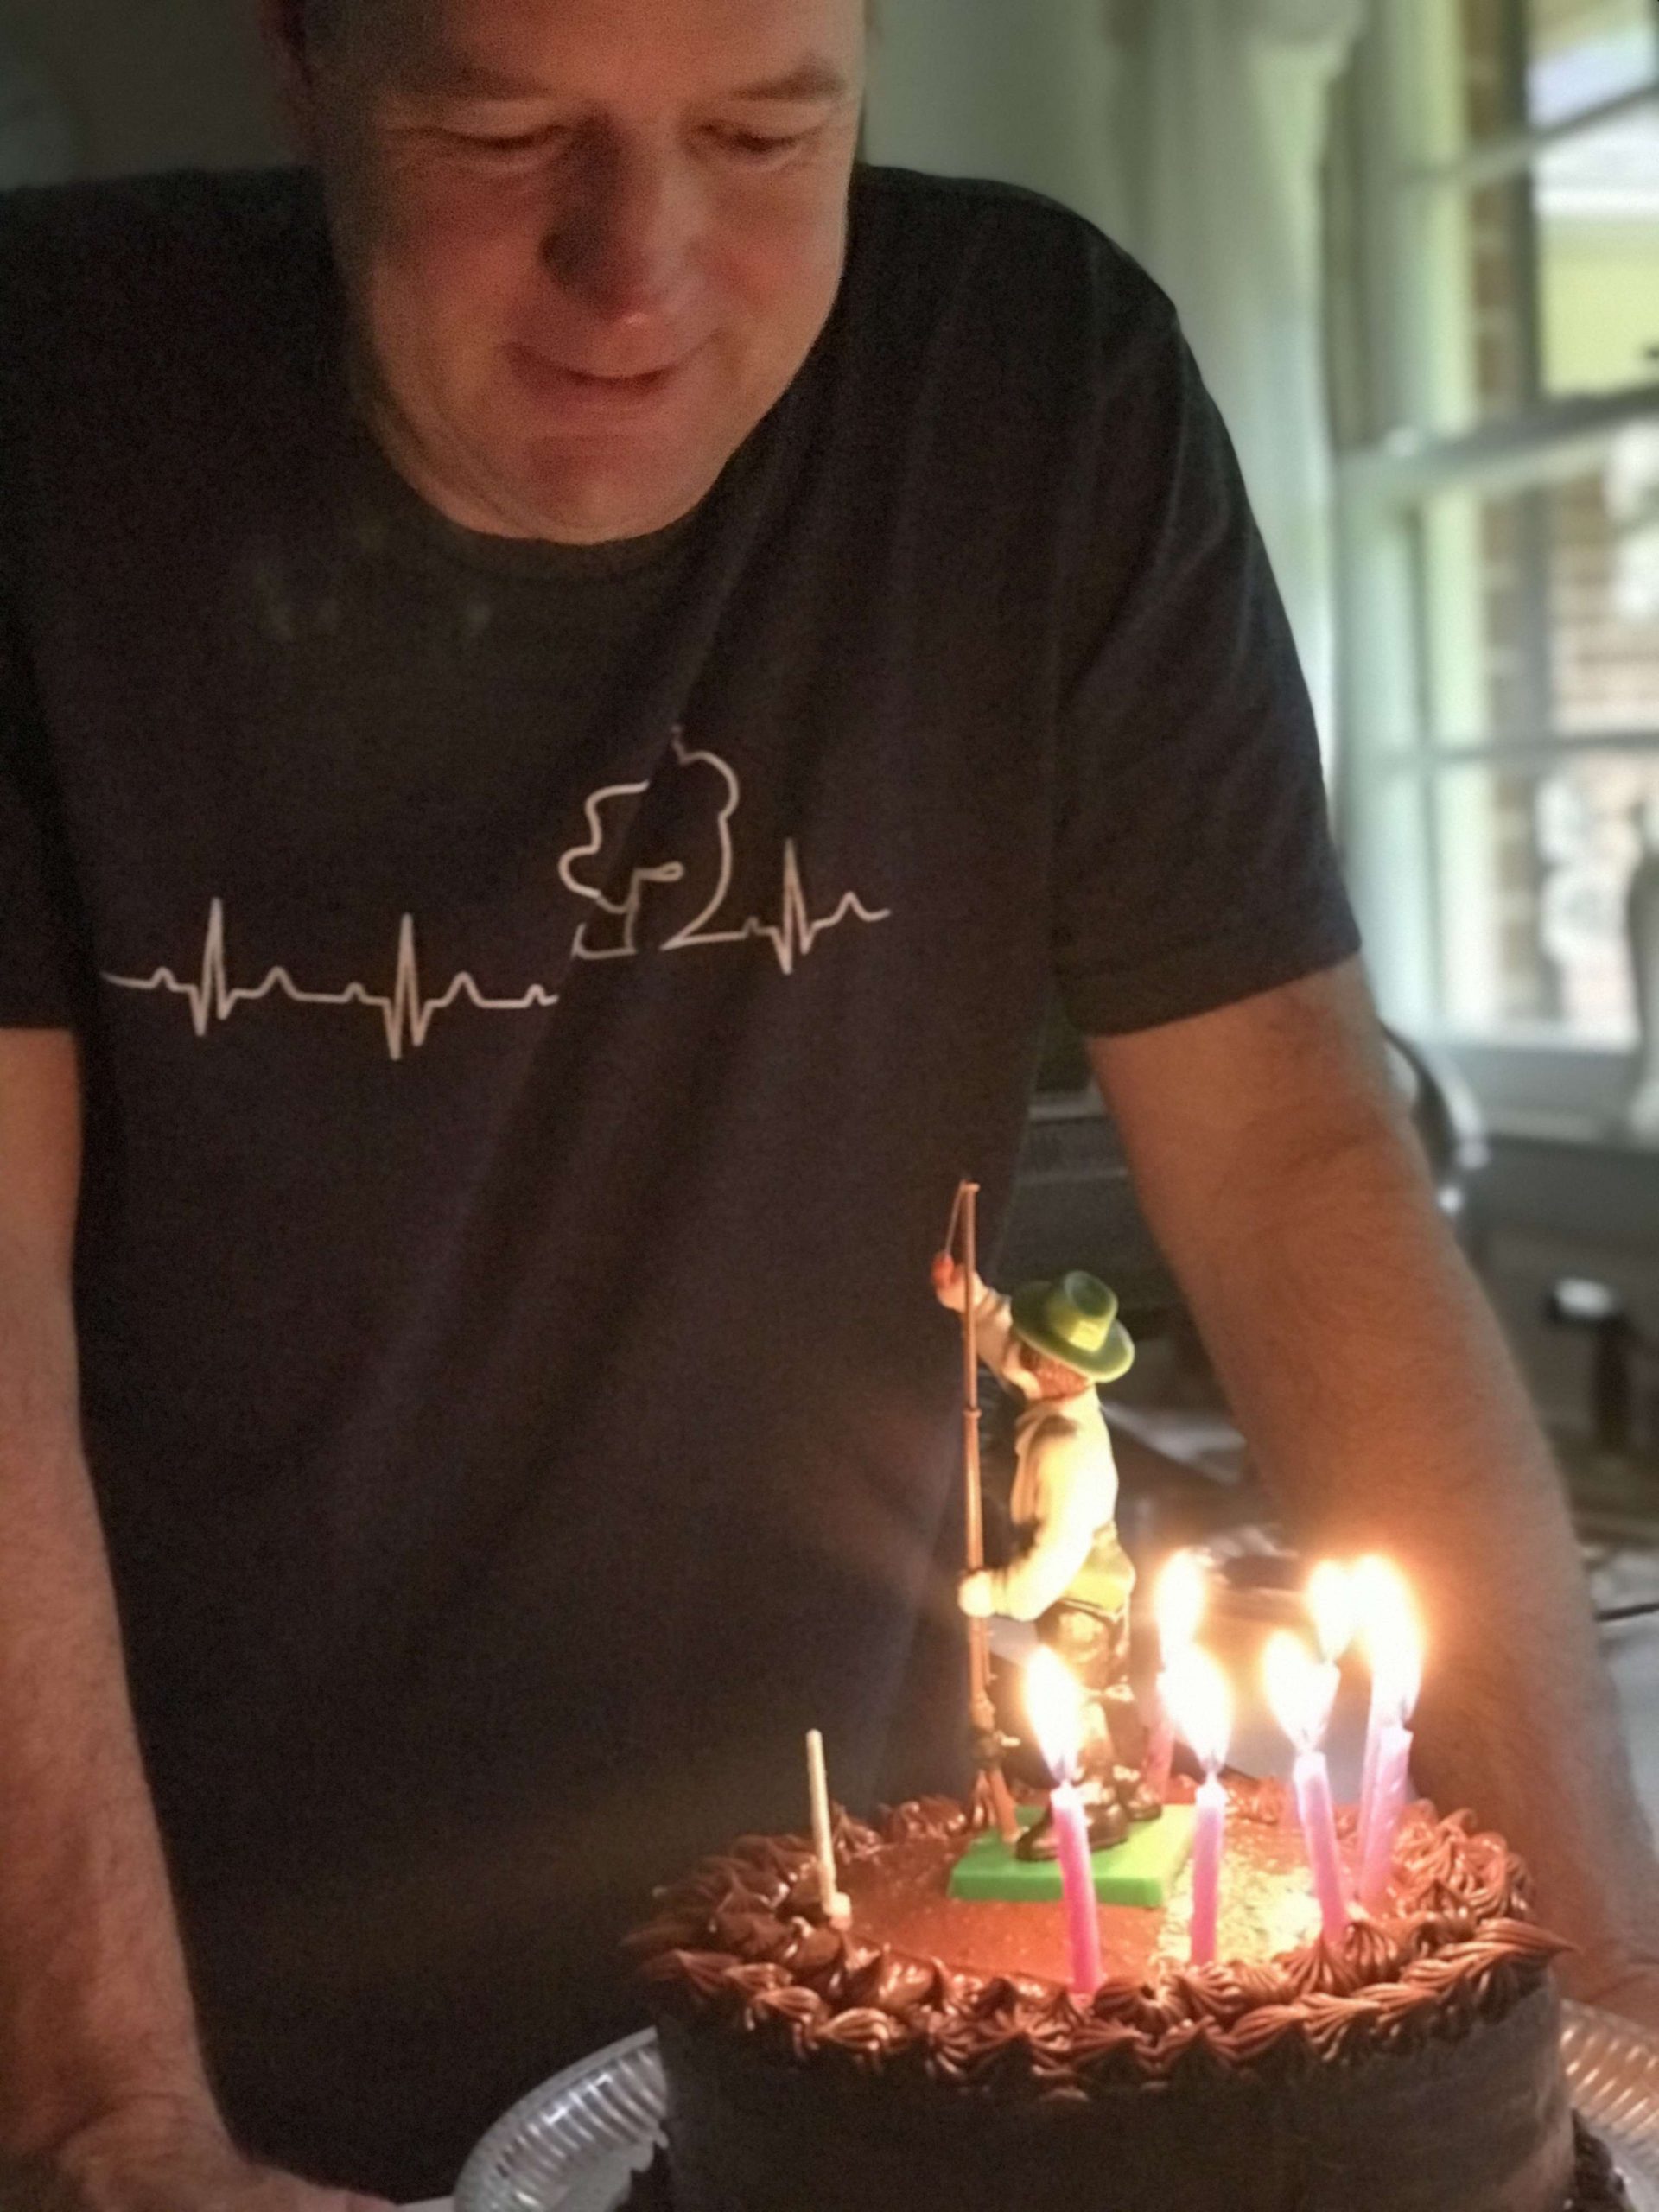 It wasn't all work; Steve celebrated his 51st birthday cake made by his daughter Sophia.